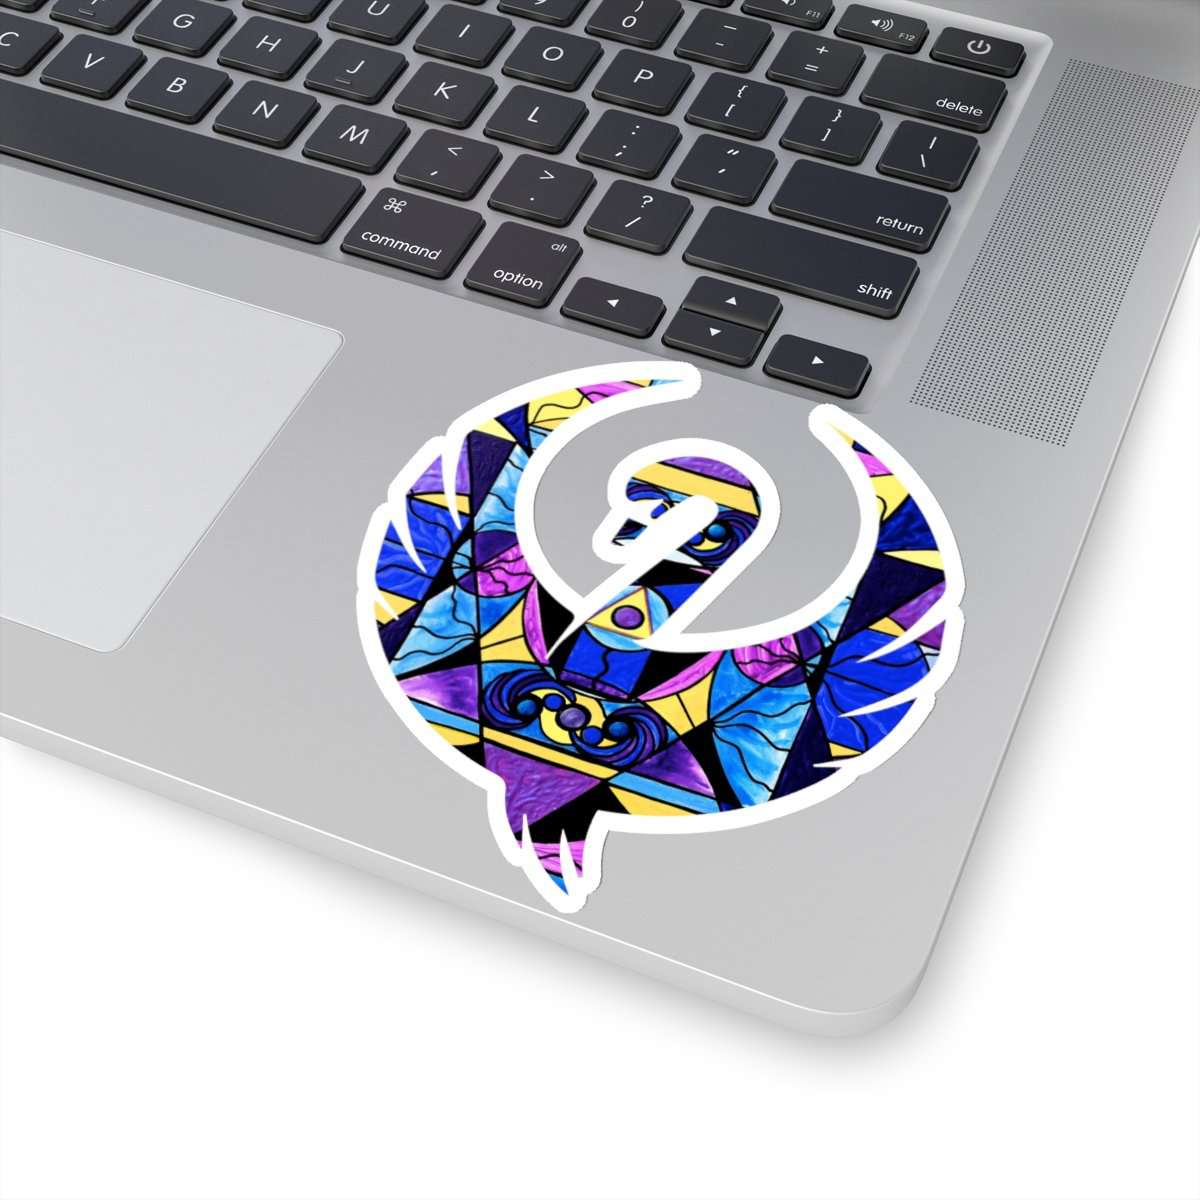 get-the-official-i-know-swan-stickers-on-sale_11.jpg